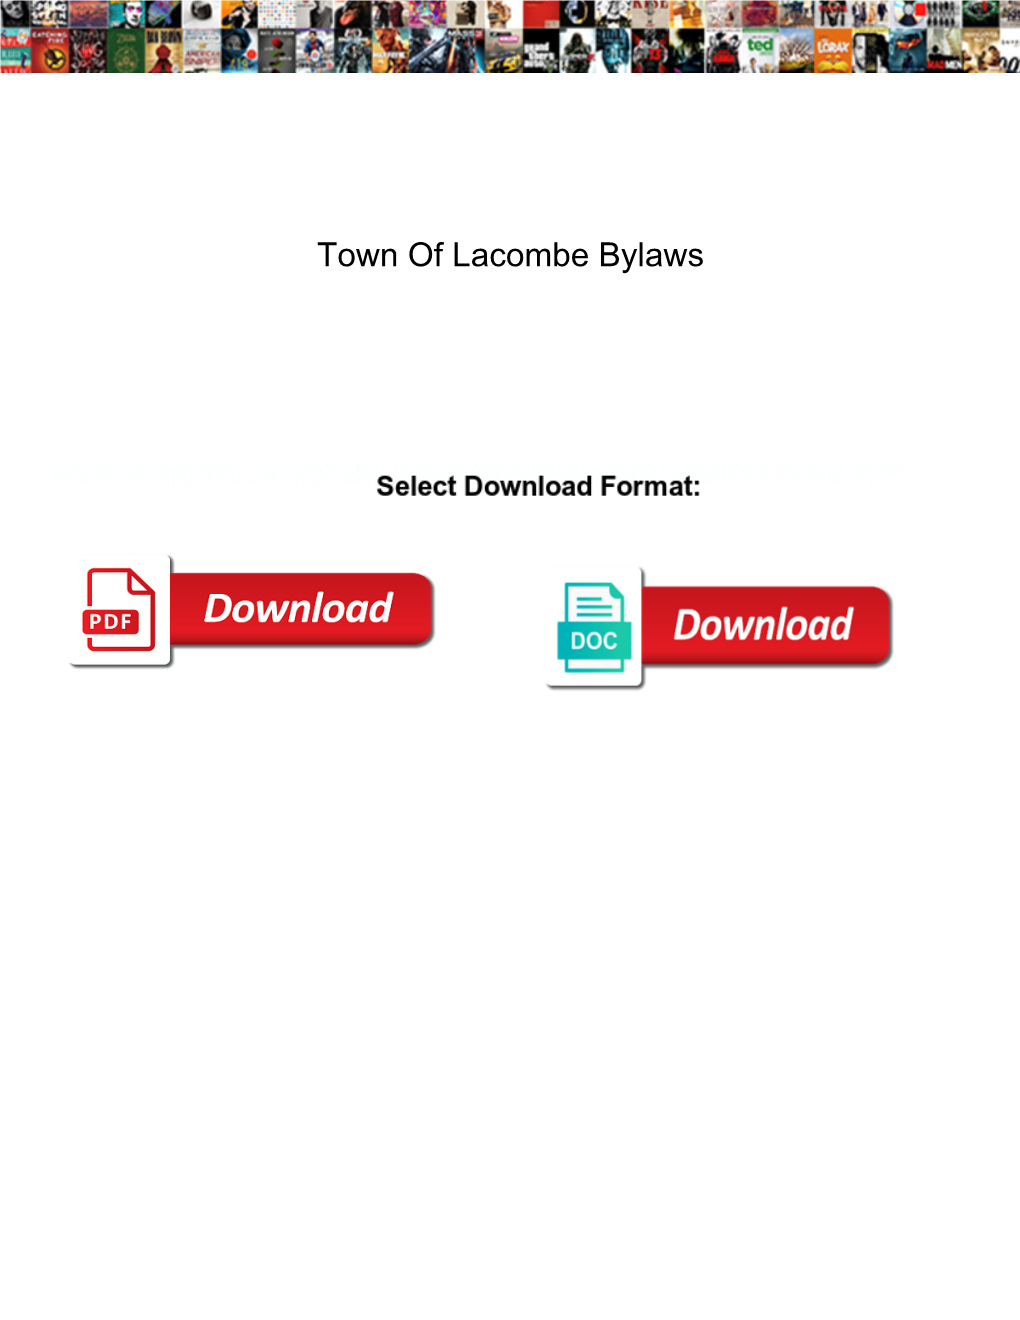 Town of Lacombe Bylaws